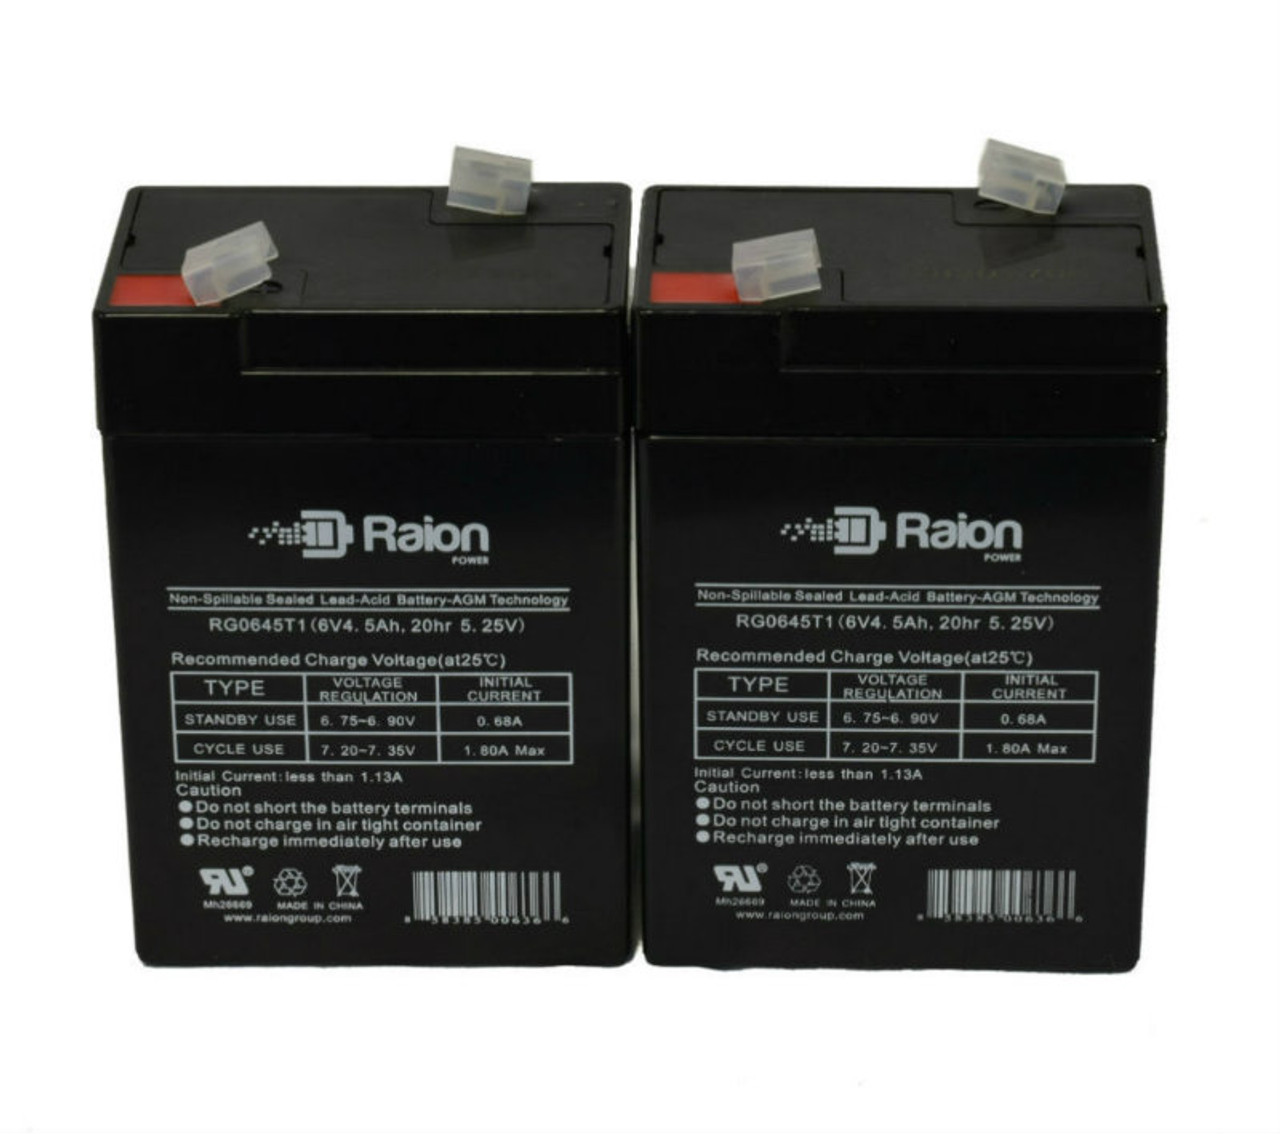 Raion Power 6V 4.5Ah Replacement Emergency Light Battery for Lithonia AP - 2 Pack